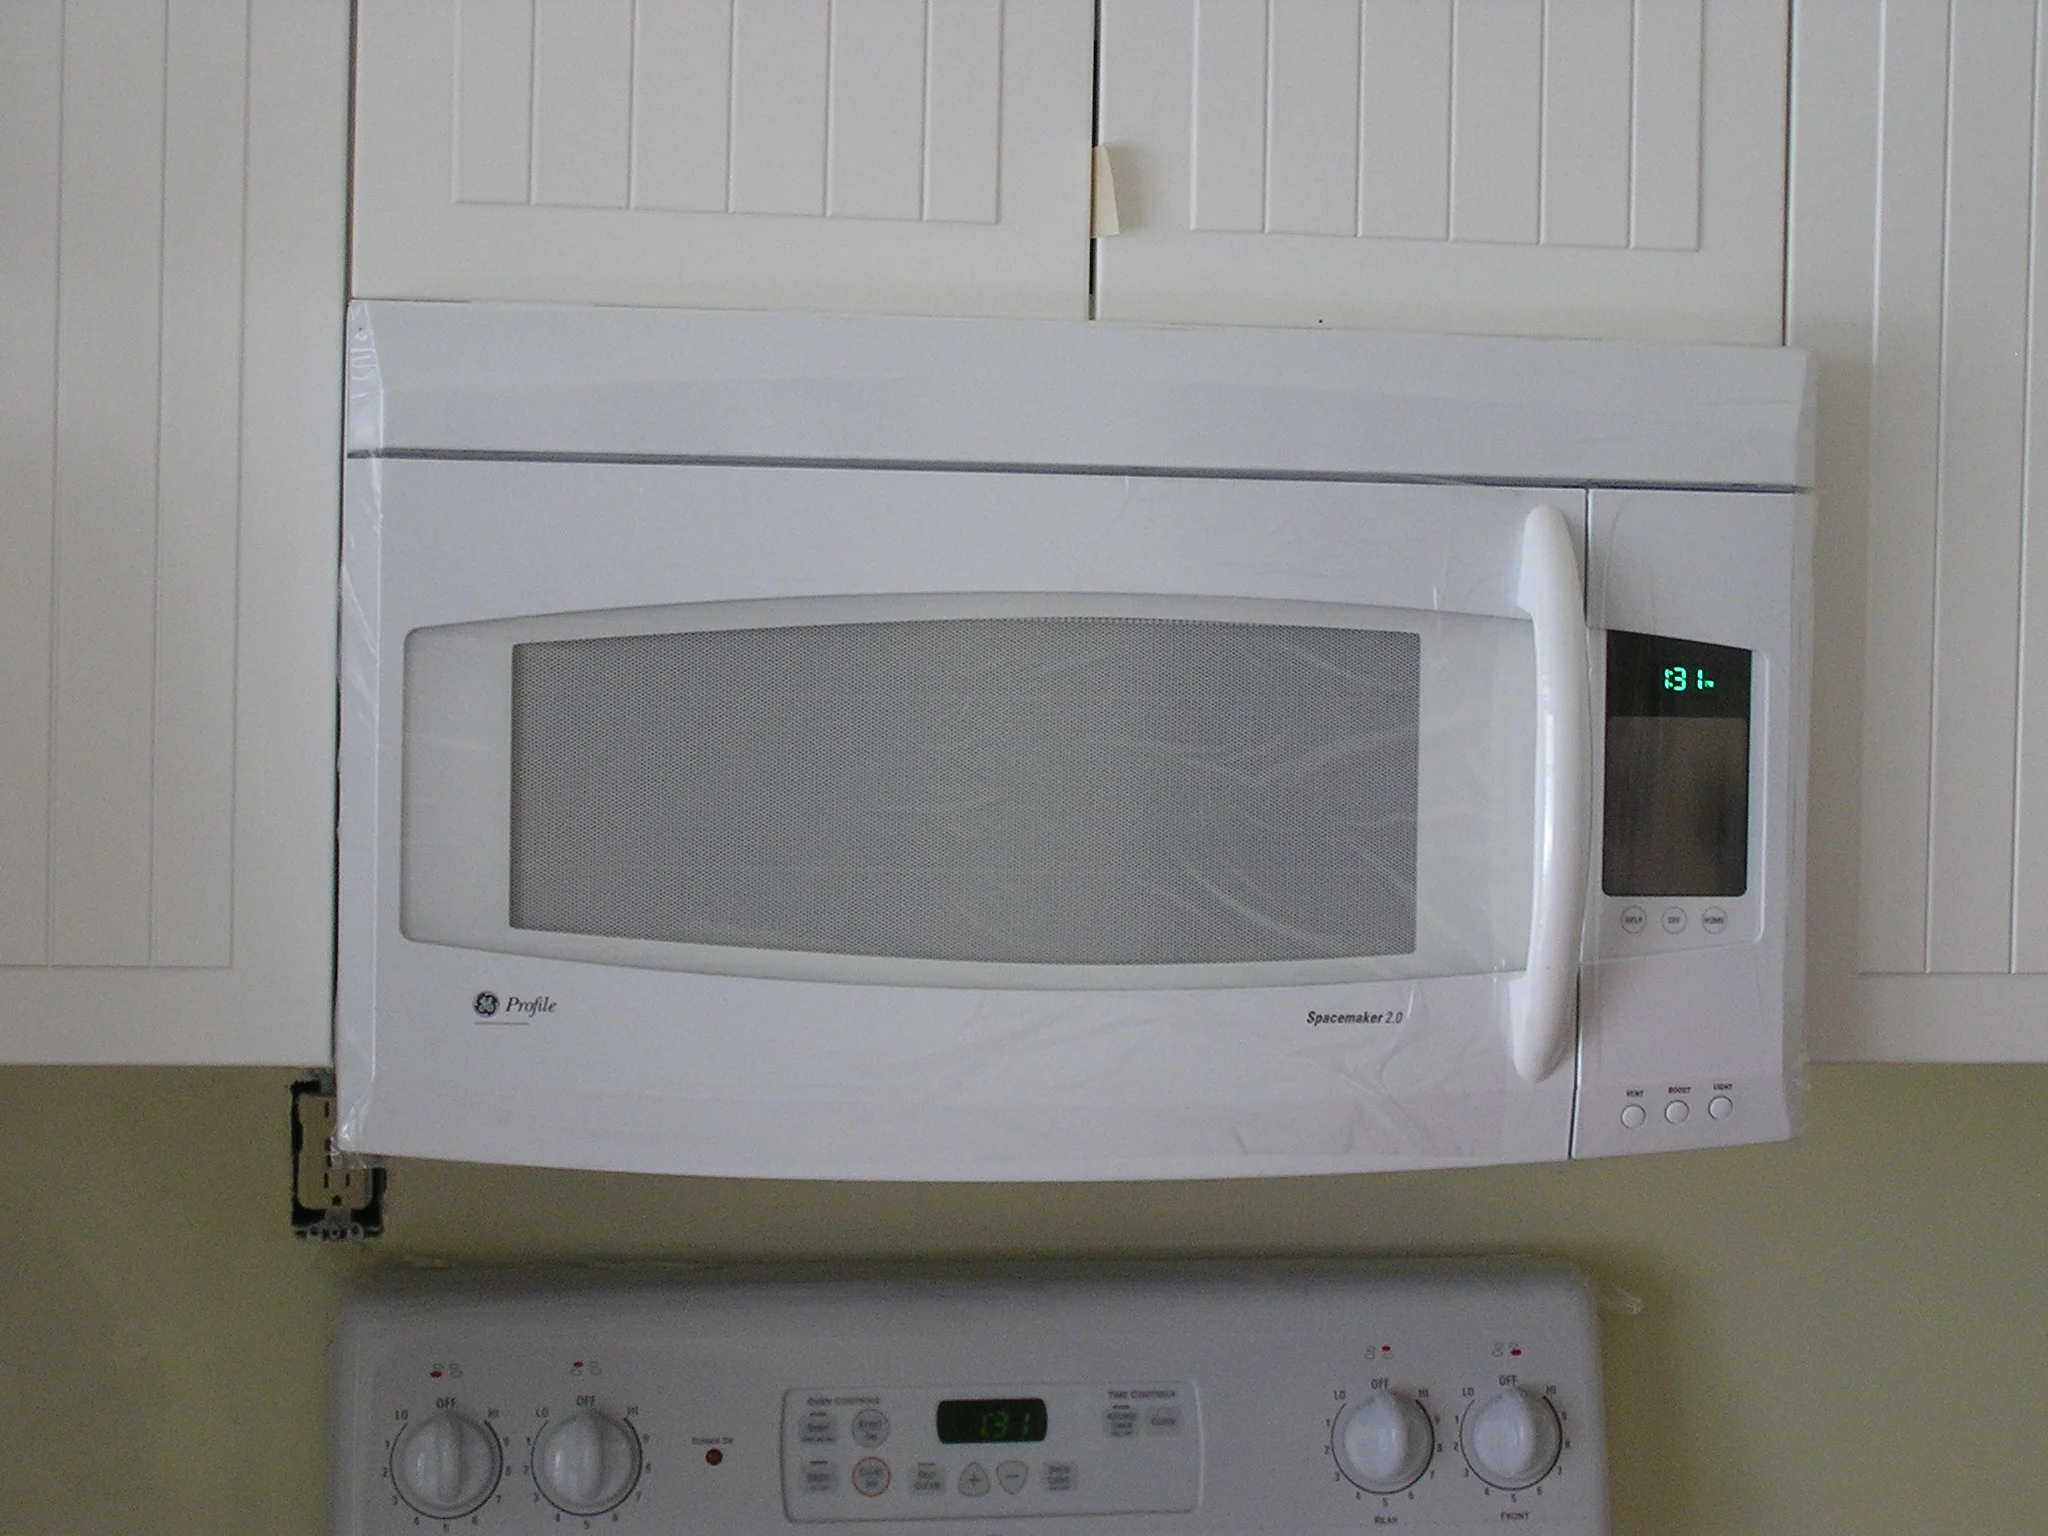 ge microwave not working but has power